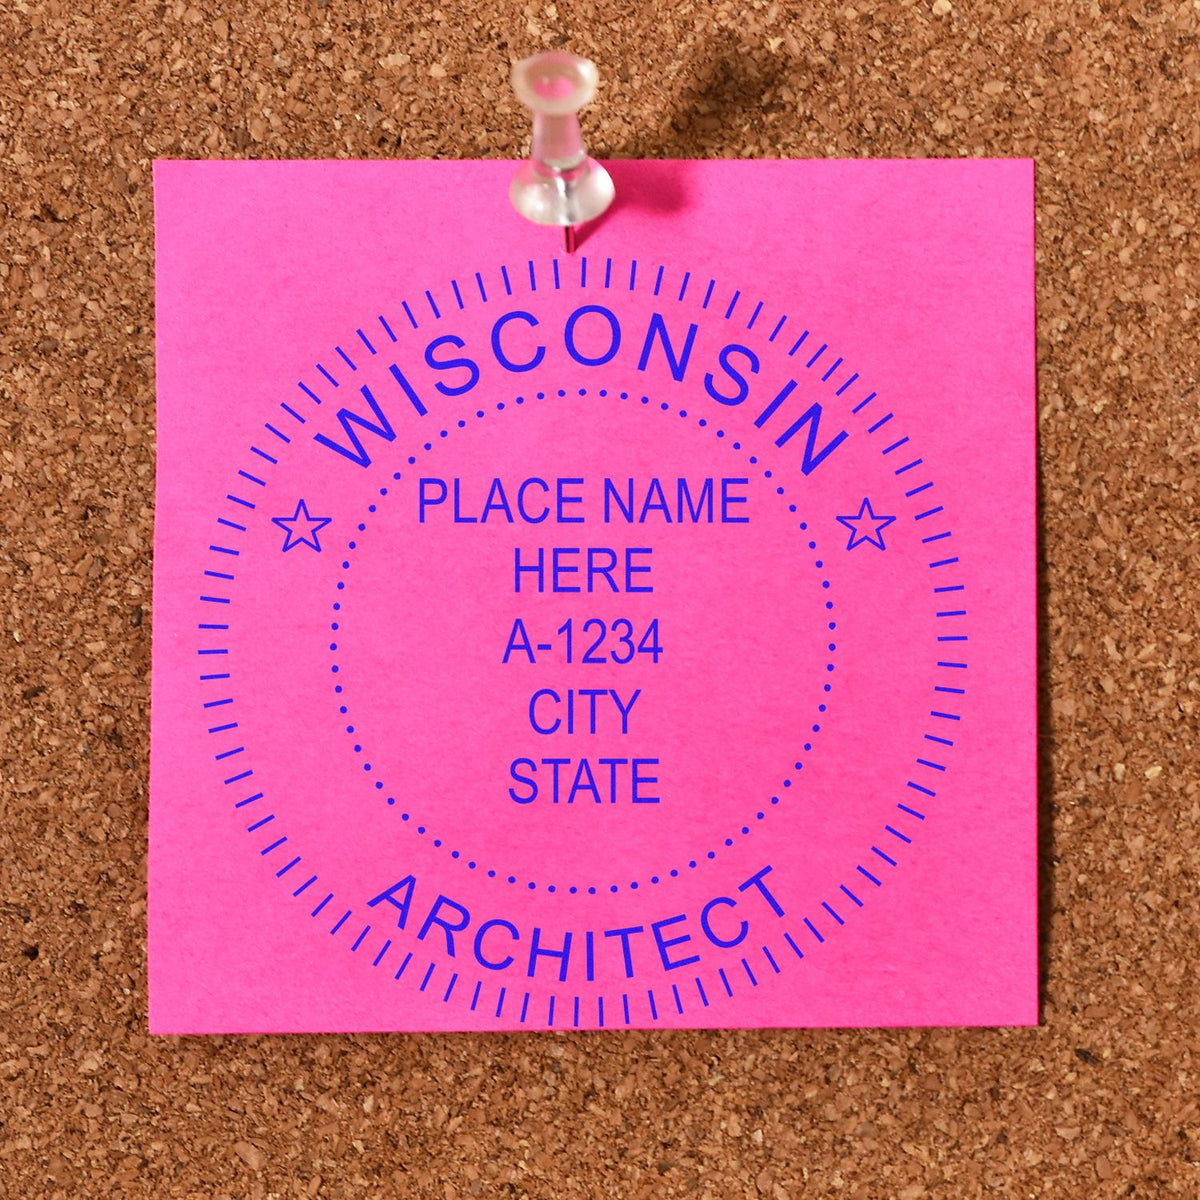 Slim Pre-Inked Wisconsin Architect Seal Stamp in use photo showing a stamped imprint of the Slim Pre-Inked Wisconsin Architect Seal Stamp